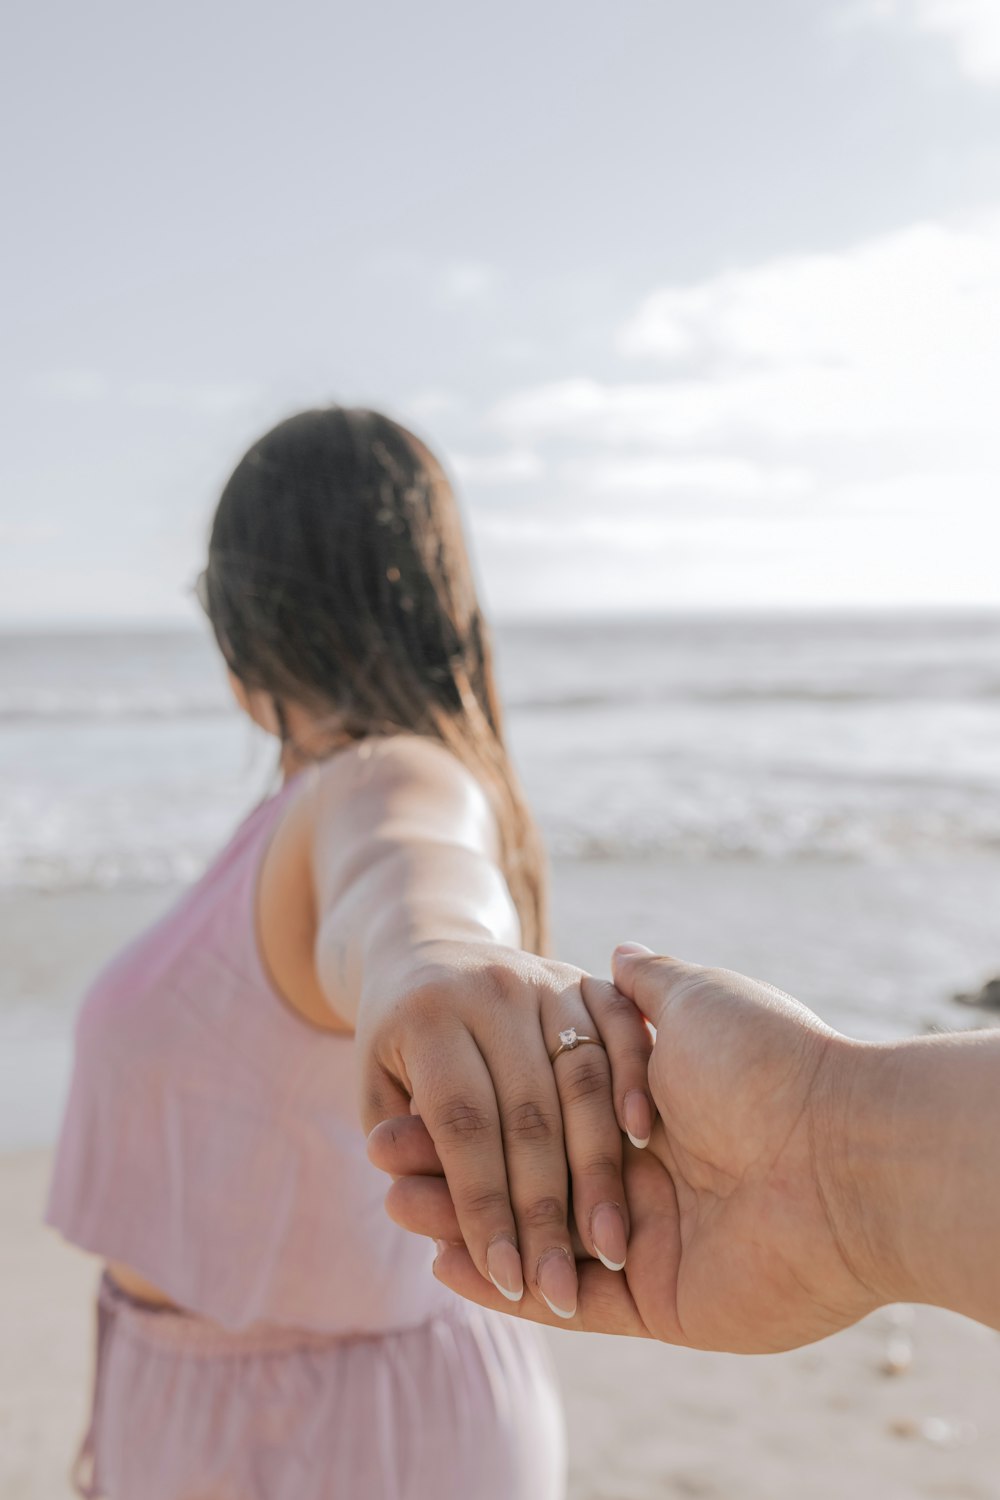 a person holding the hand of another person on a beach